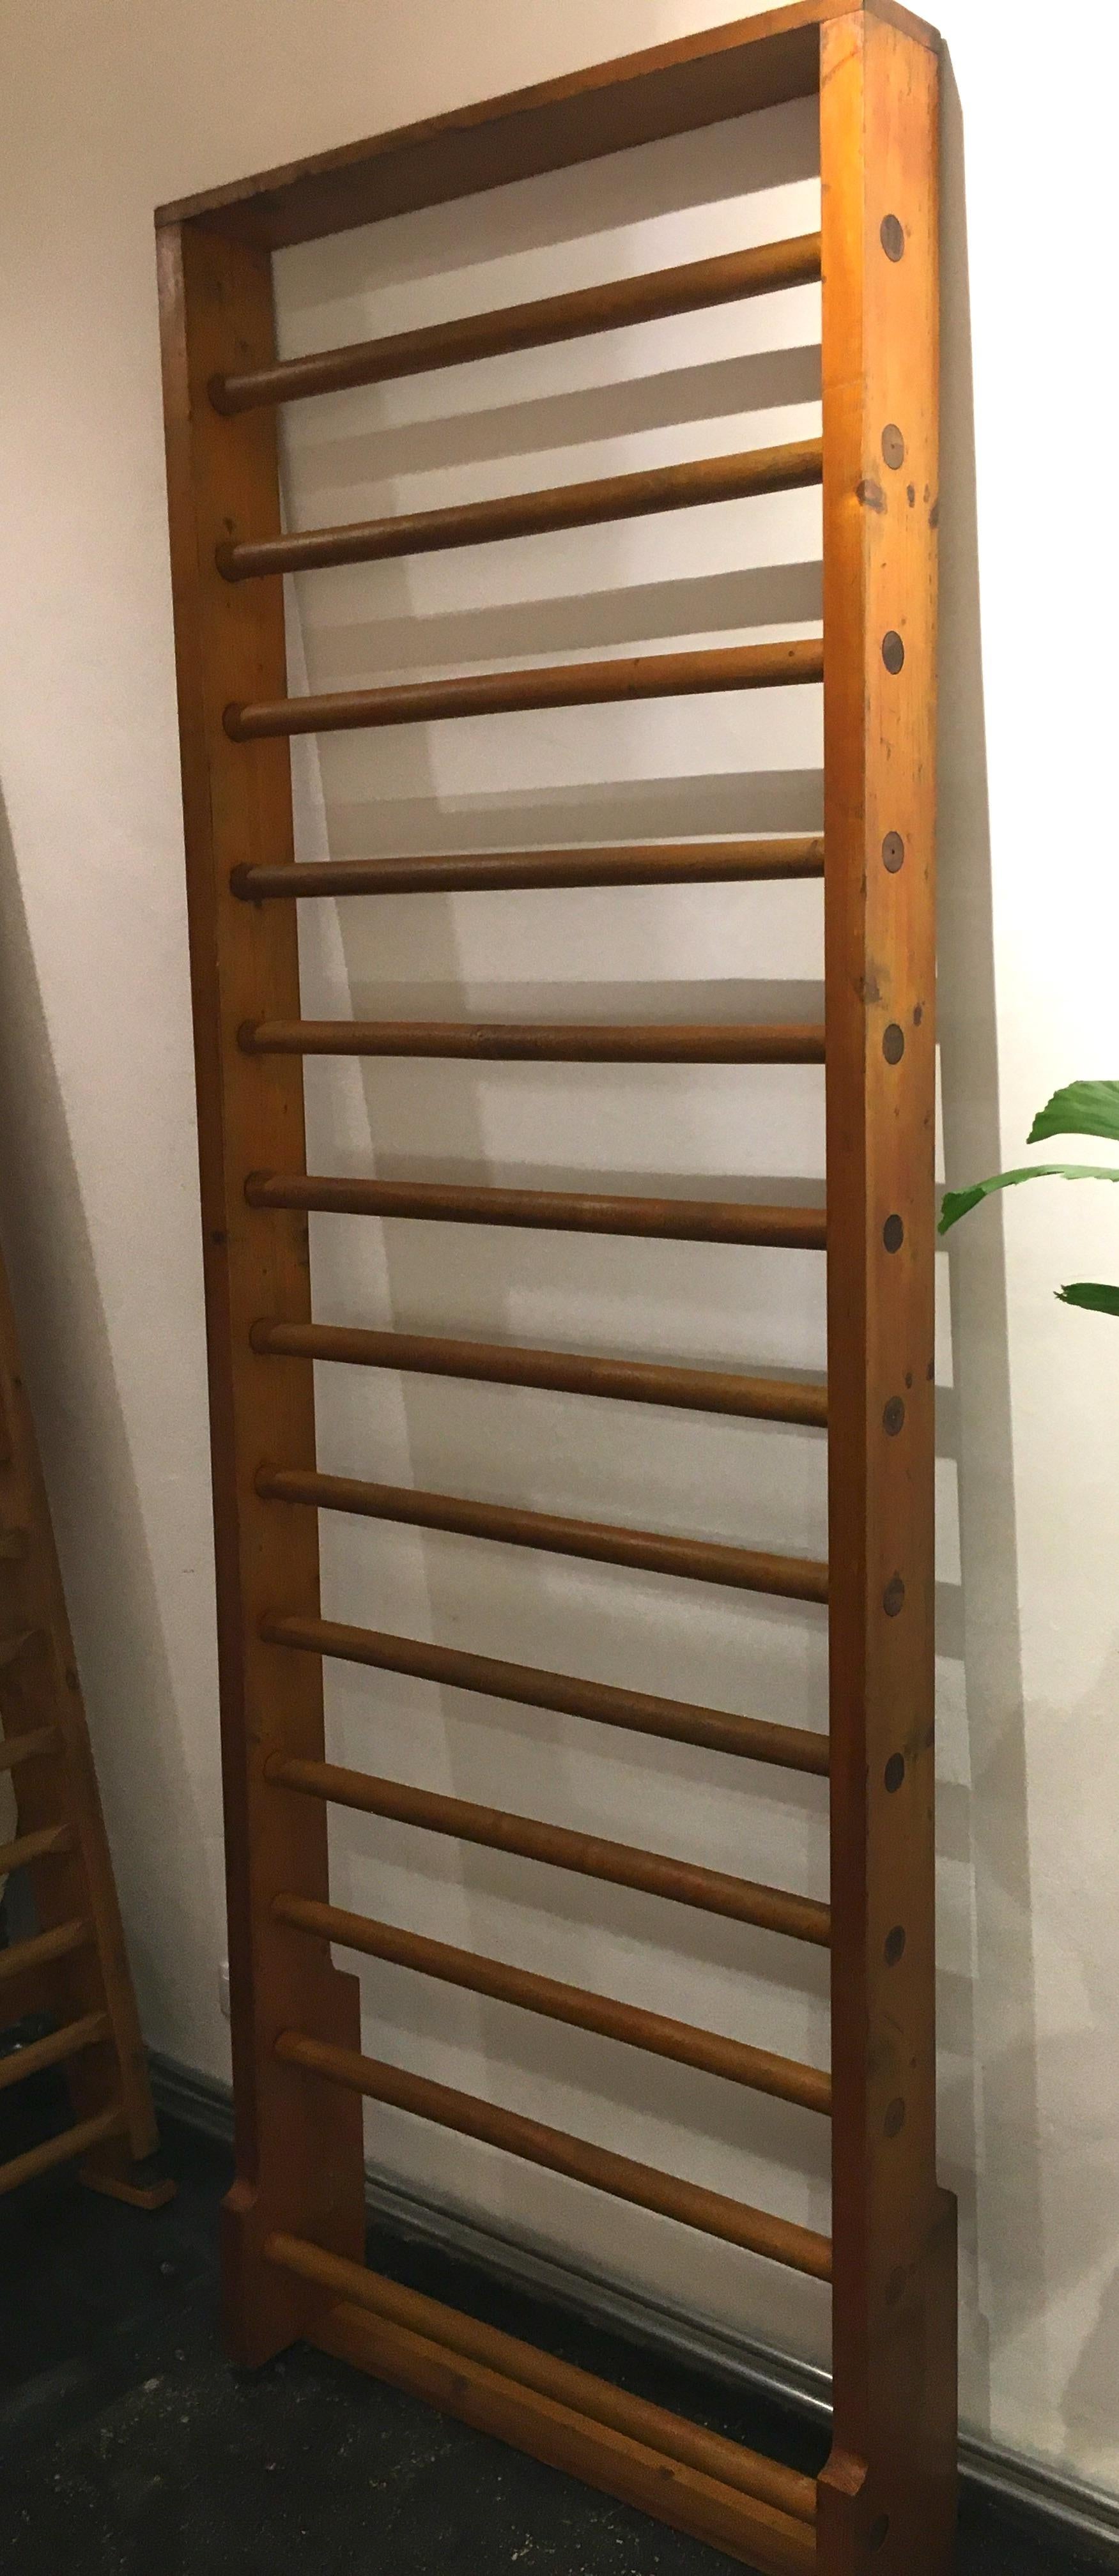 This wall bar from an old gym was completely restored, the wood shows a beautiful patina. Whether for a daily workout or as an object that also serves as a clothes rack or towel rack, this wall bars is definitely a real eyecatcher.